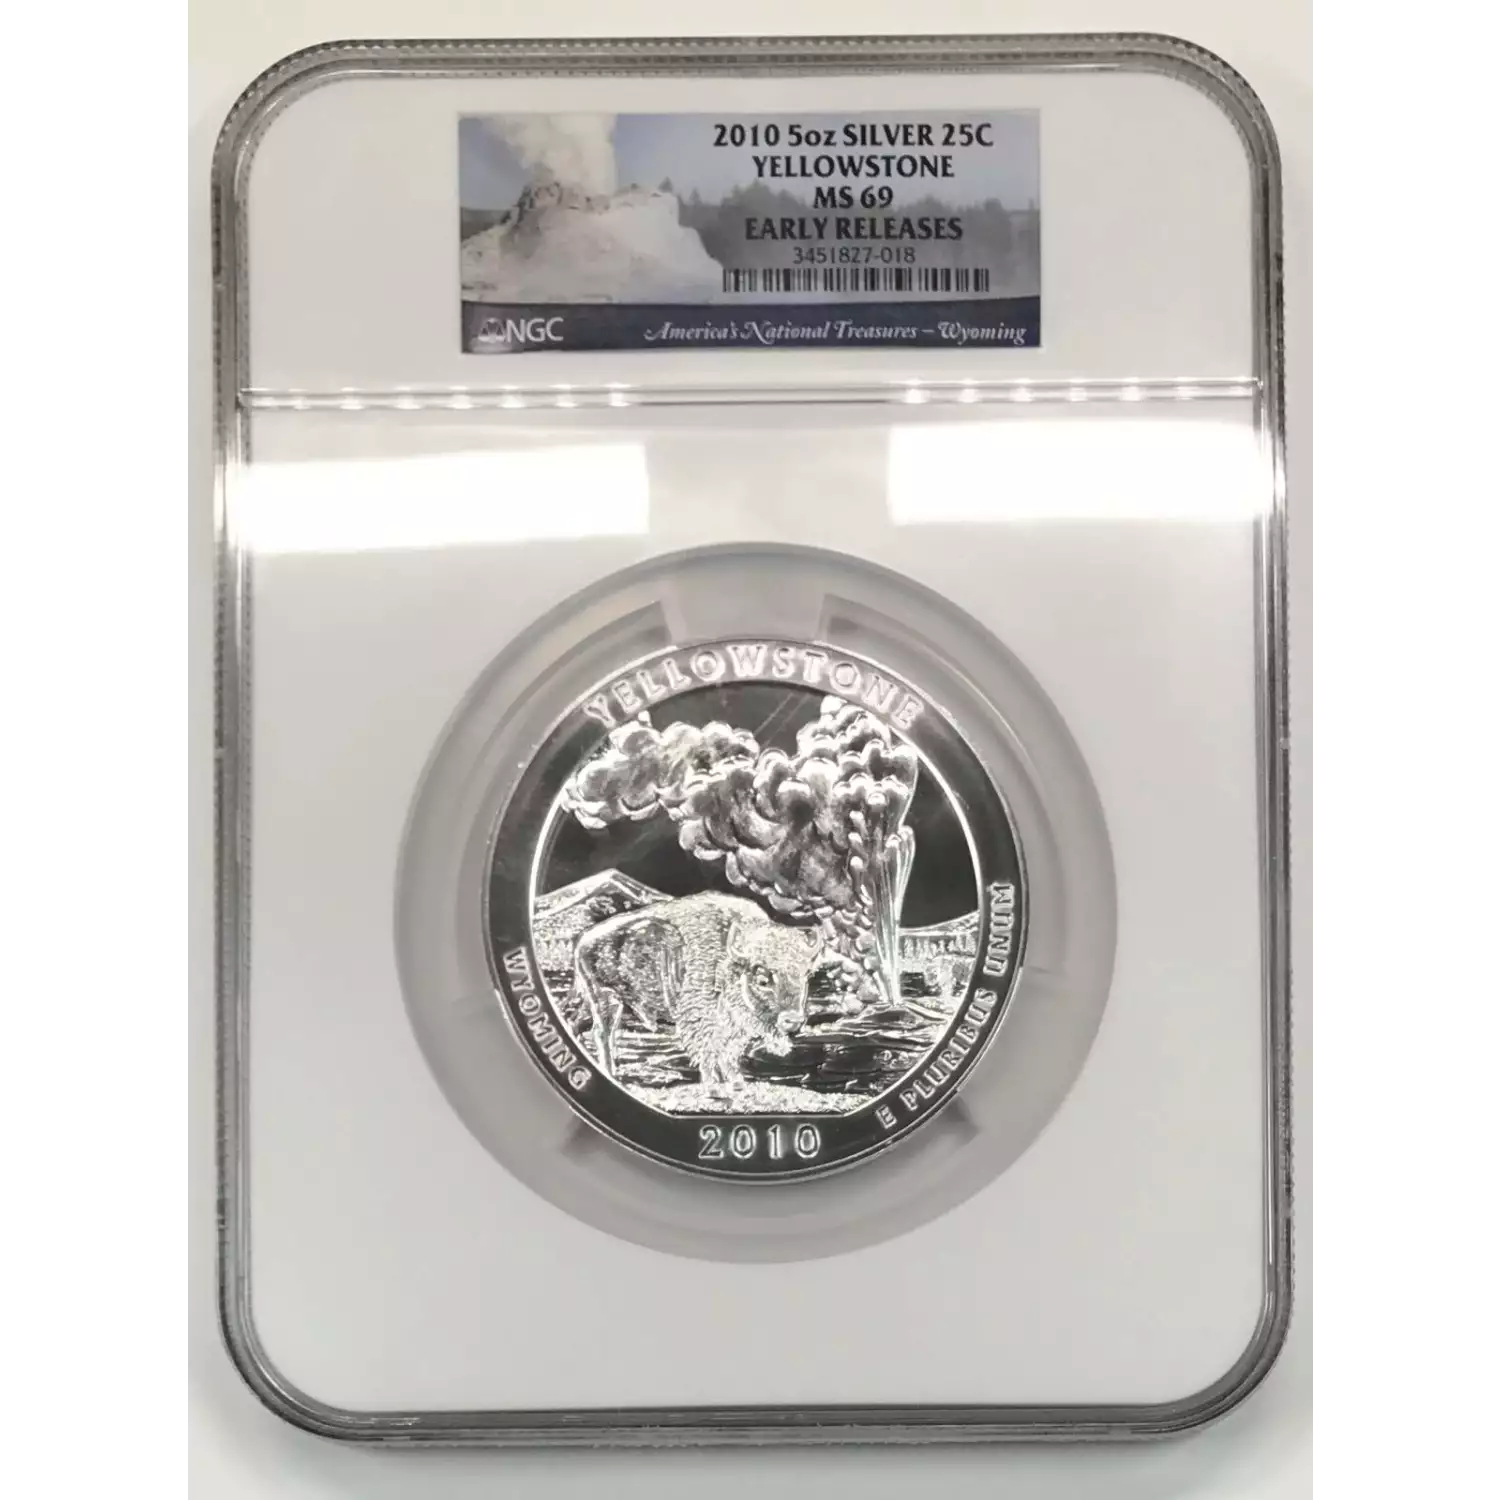 2010 YELLOWSTONE EARLY RELEASES 